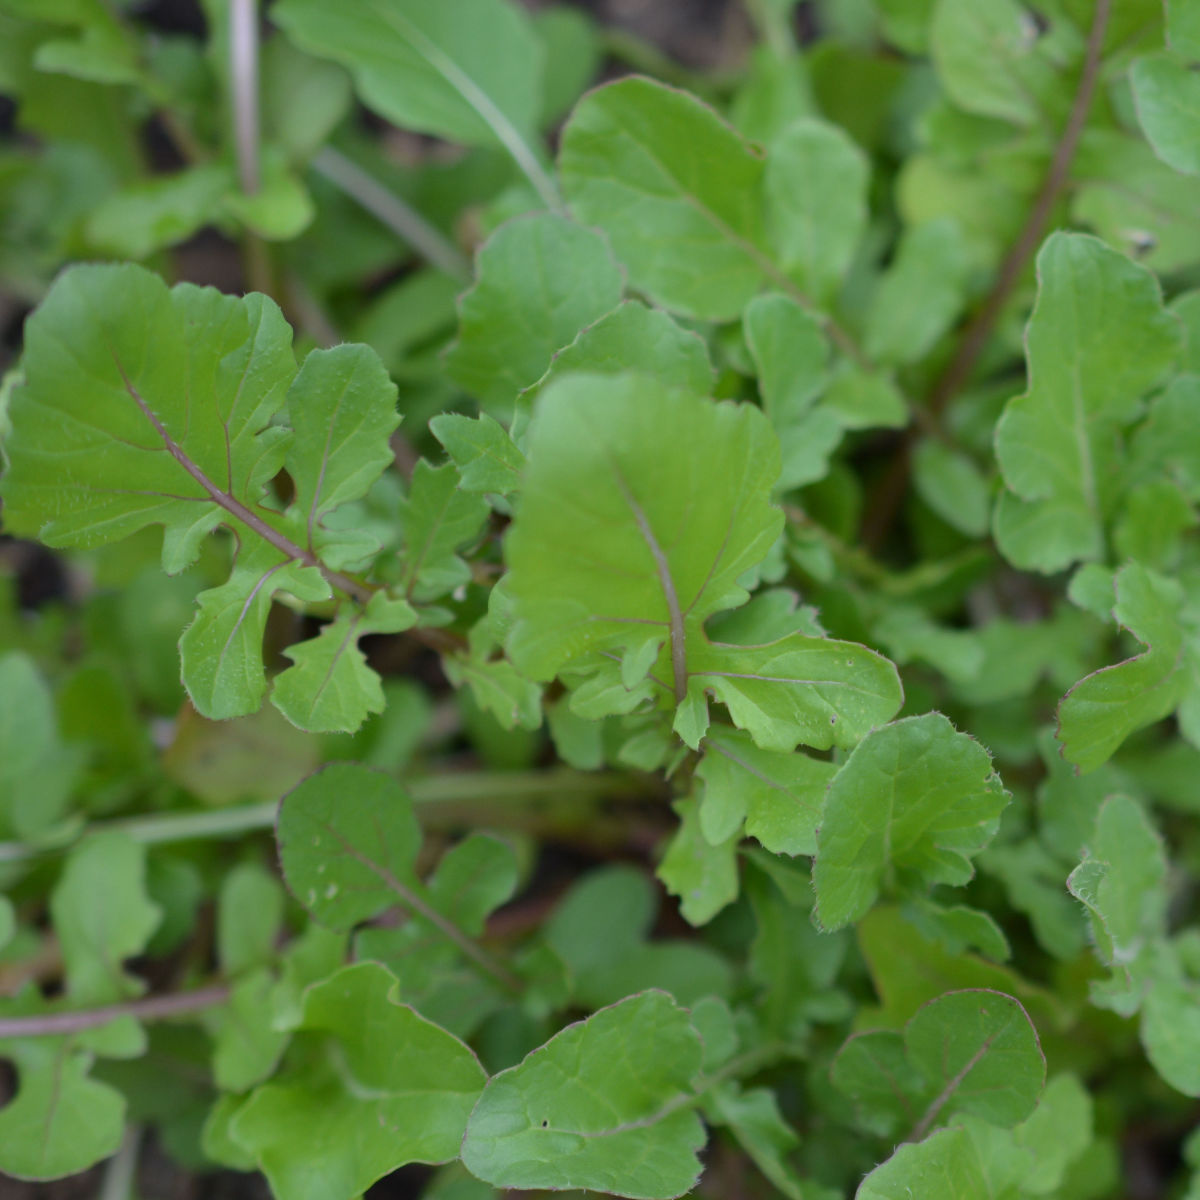 Arugula is so tasty in a salad, and we will have plenty for salads all winter, unless there is a hard freeze.